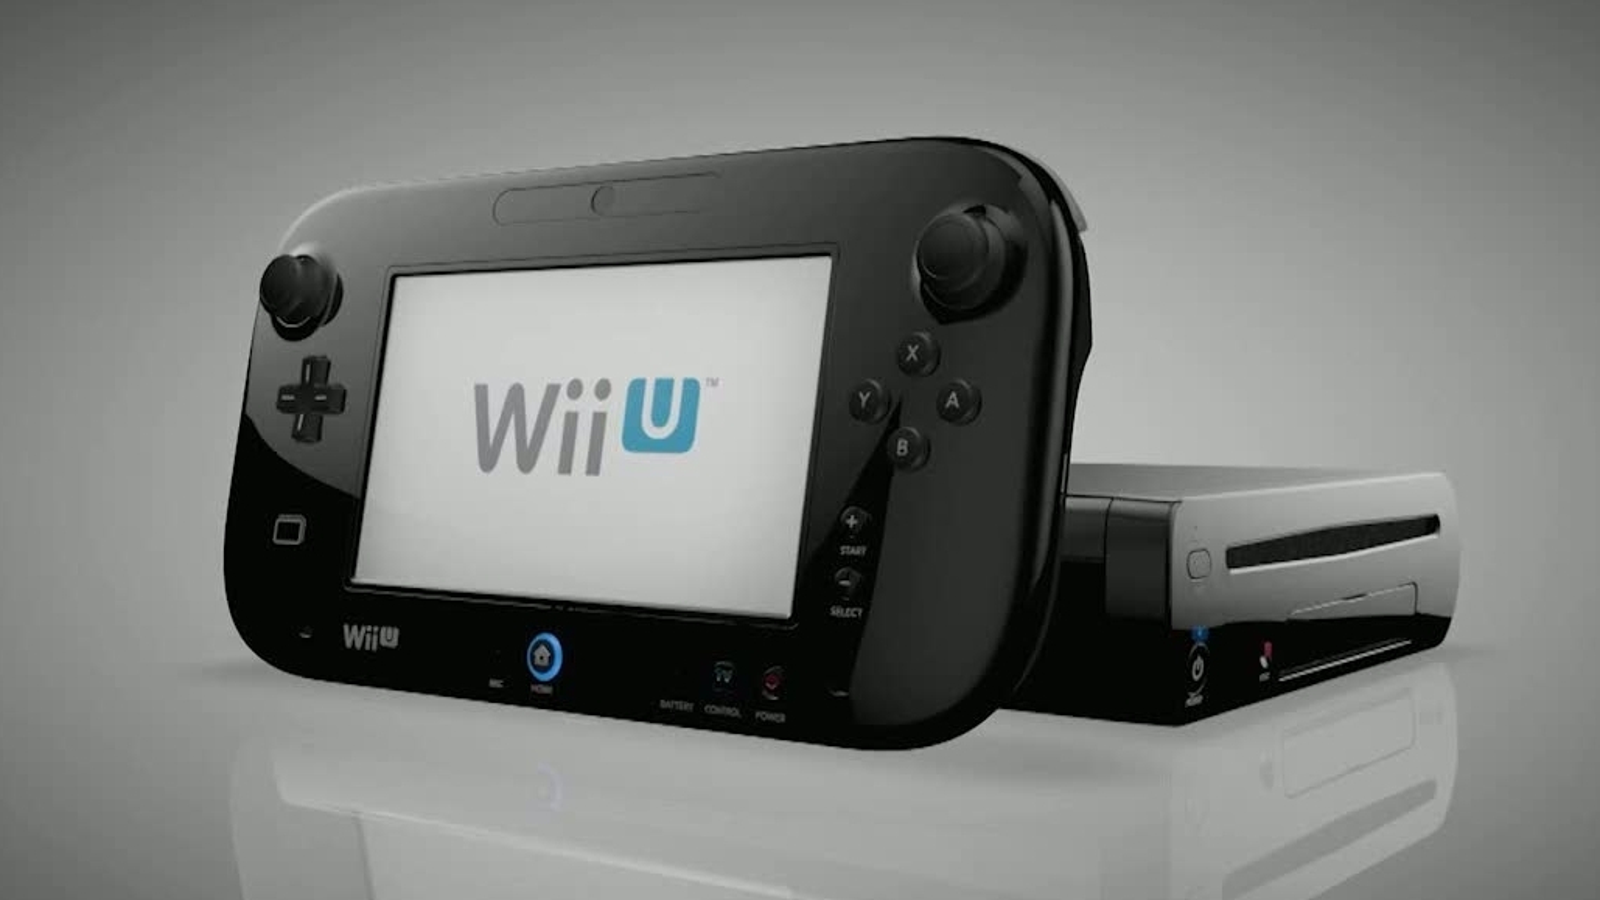 ACT NOW! Before The Wii U eShop Closes FOREVER